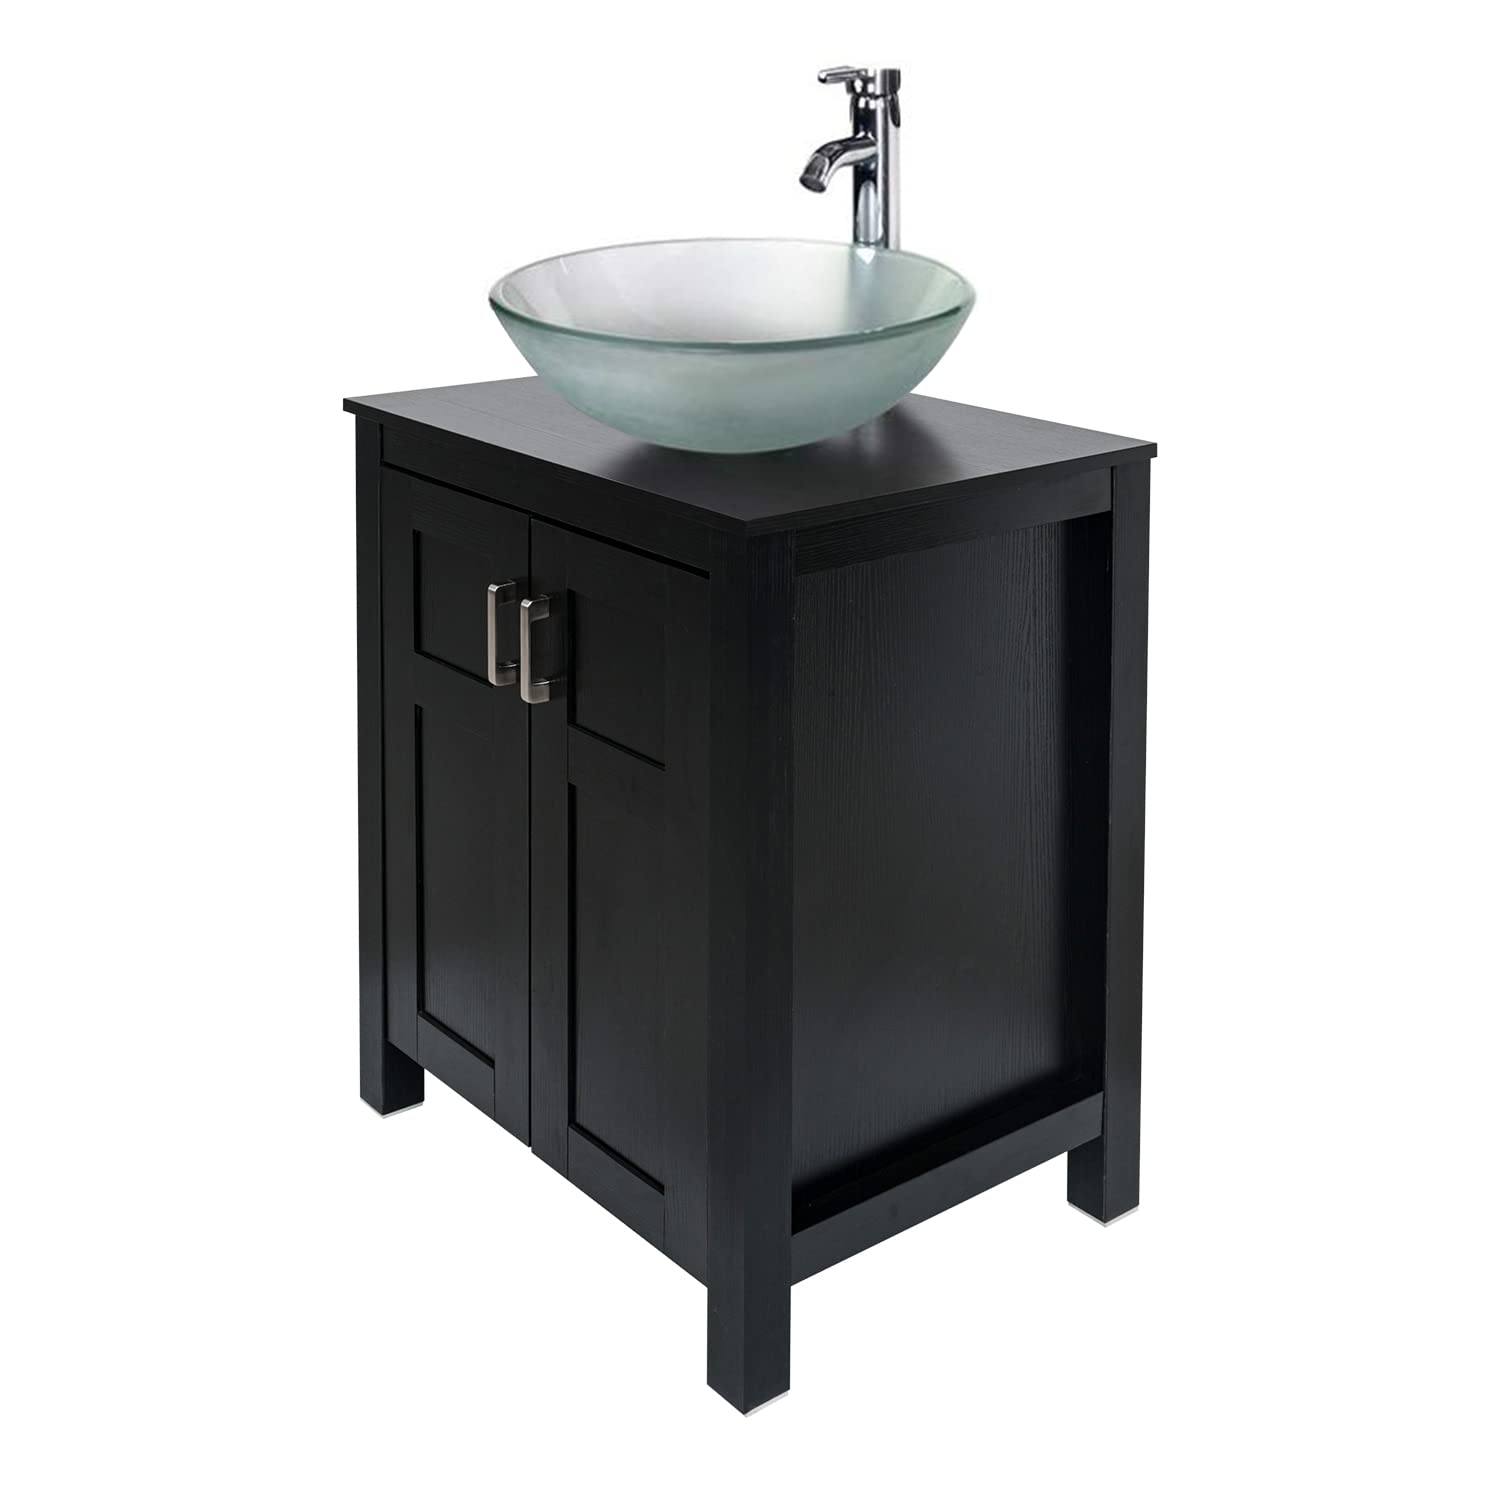 Black Bathroom Vanity Set with Frosted Glass Sink HW1120